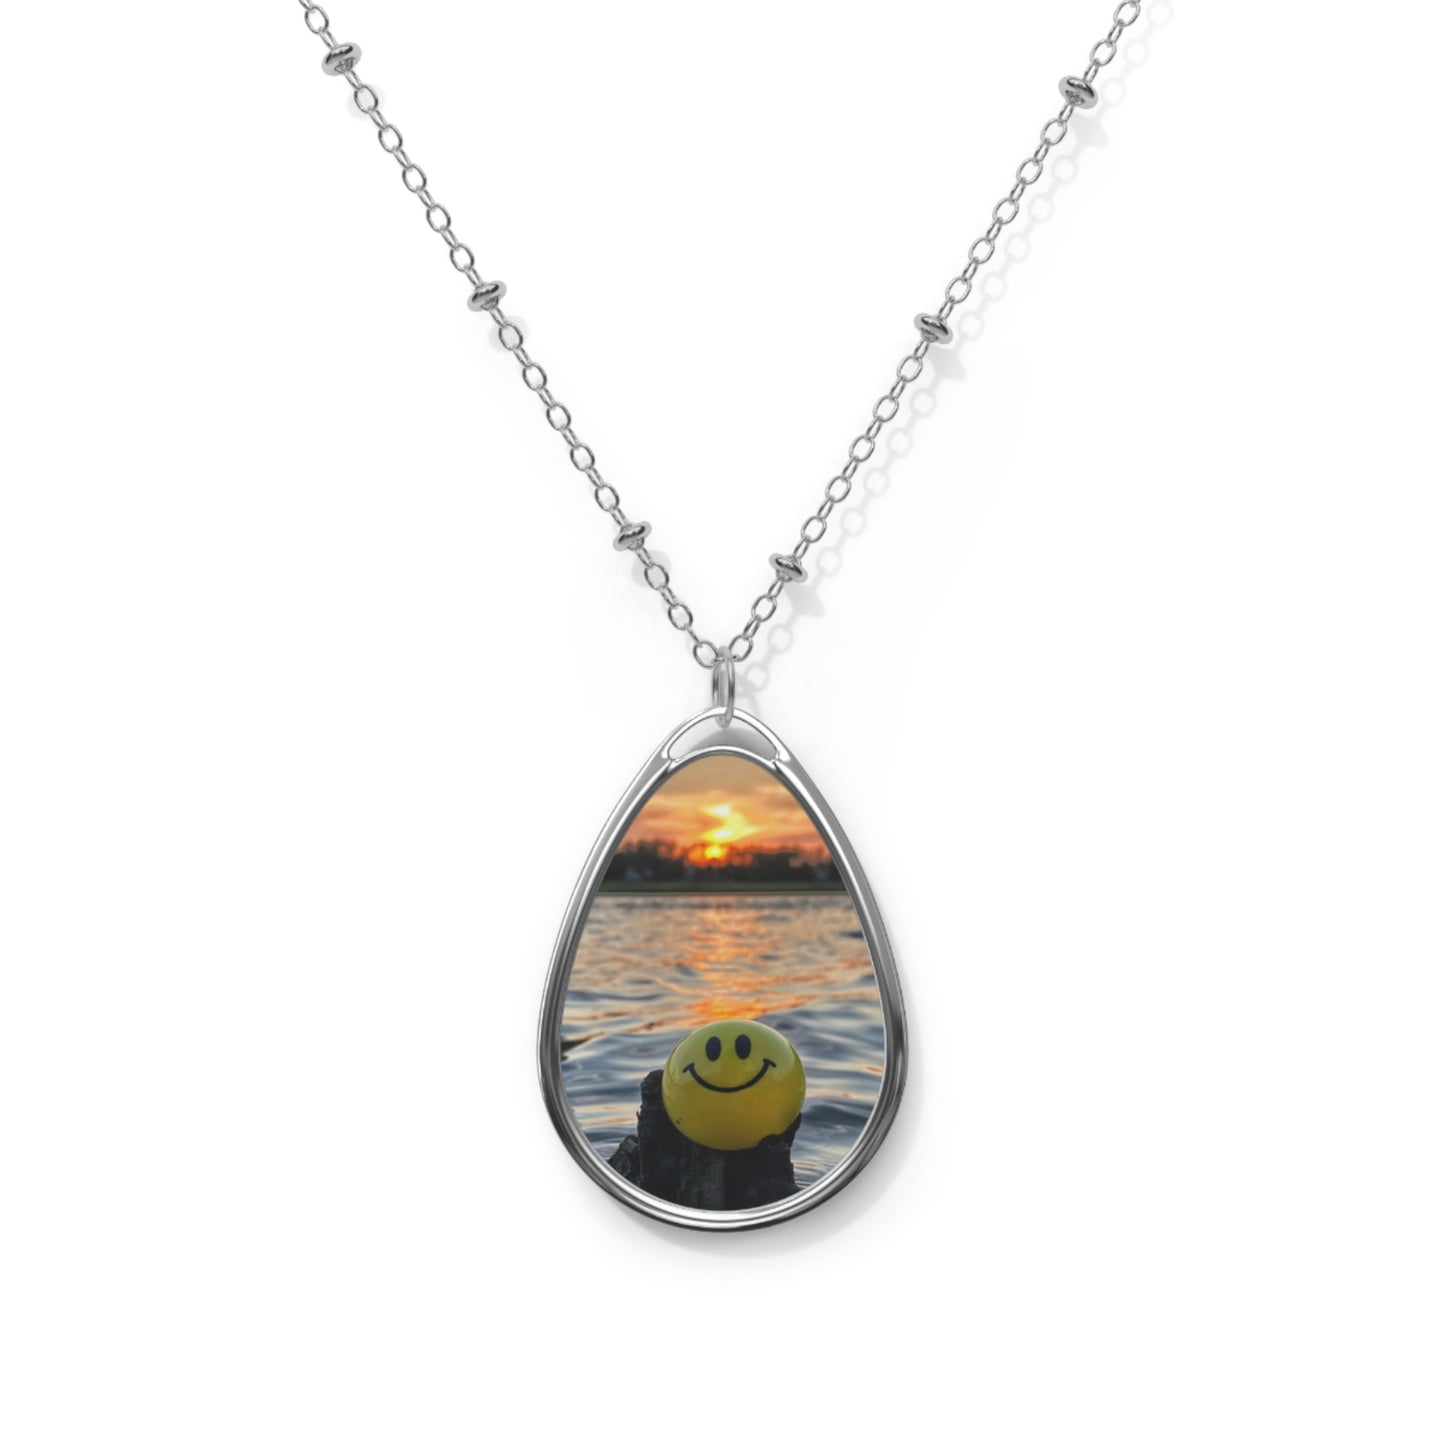 All Smiles Oval Necklace